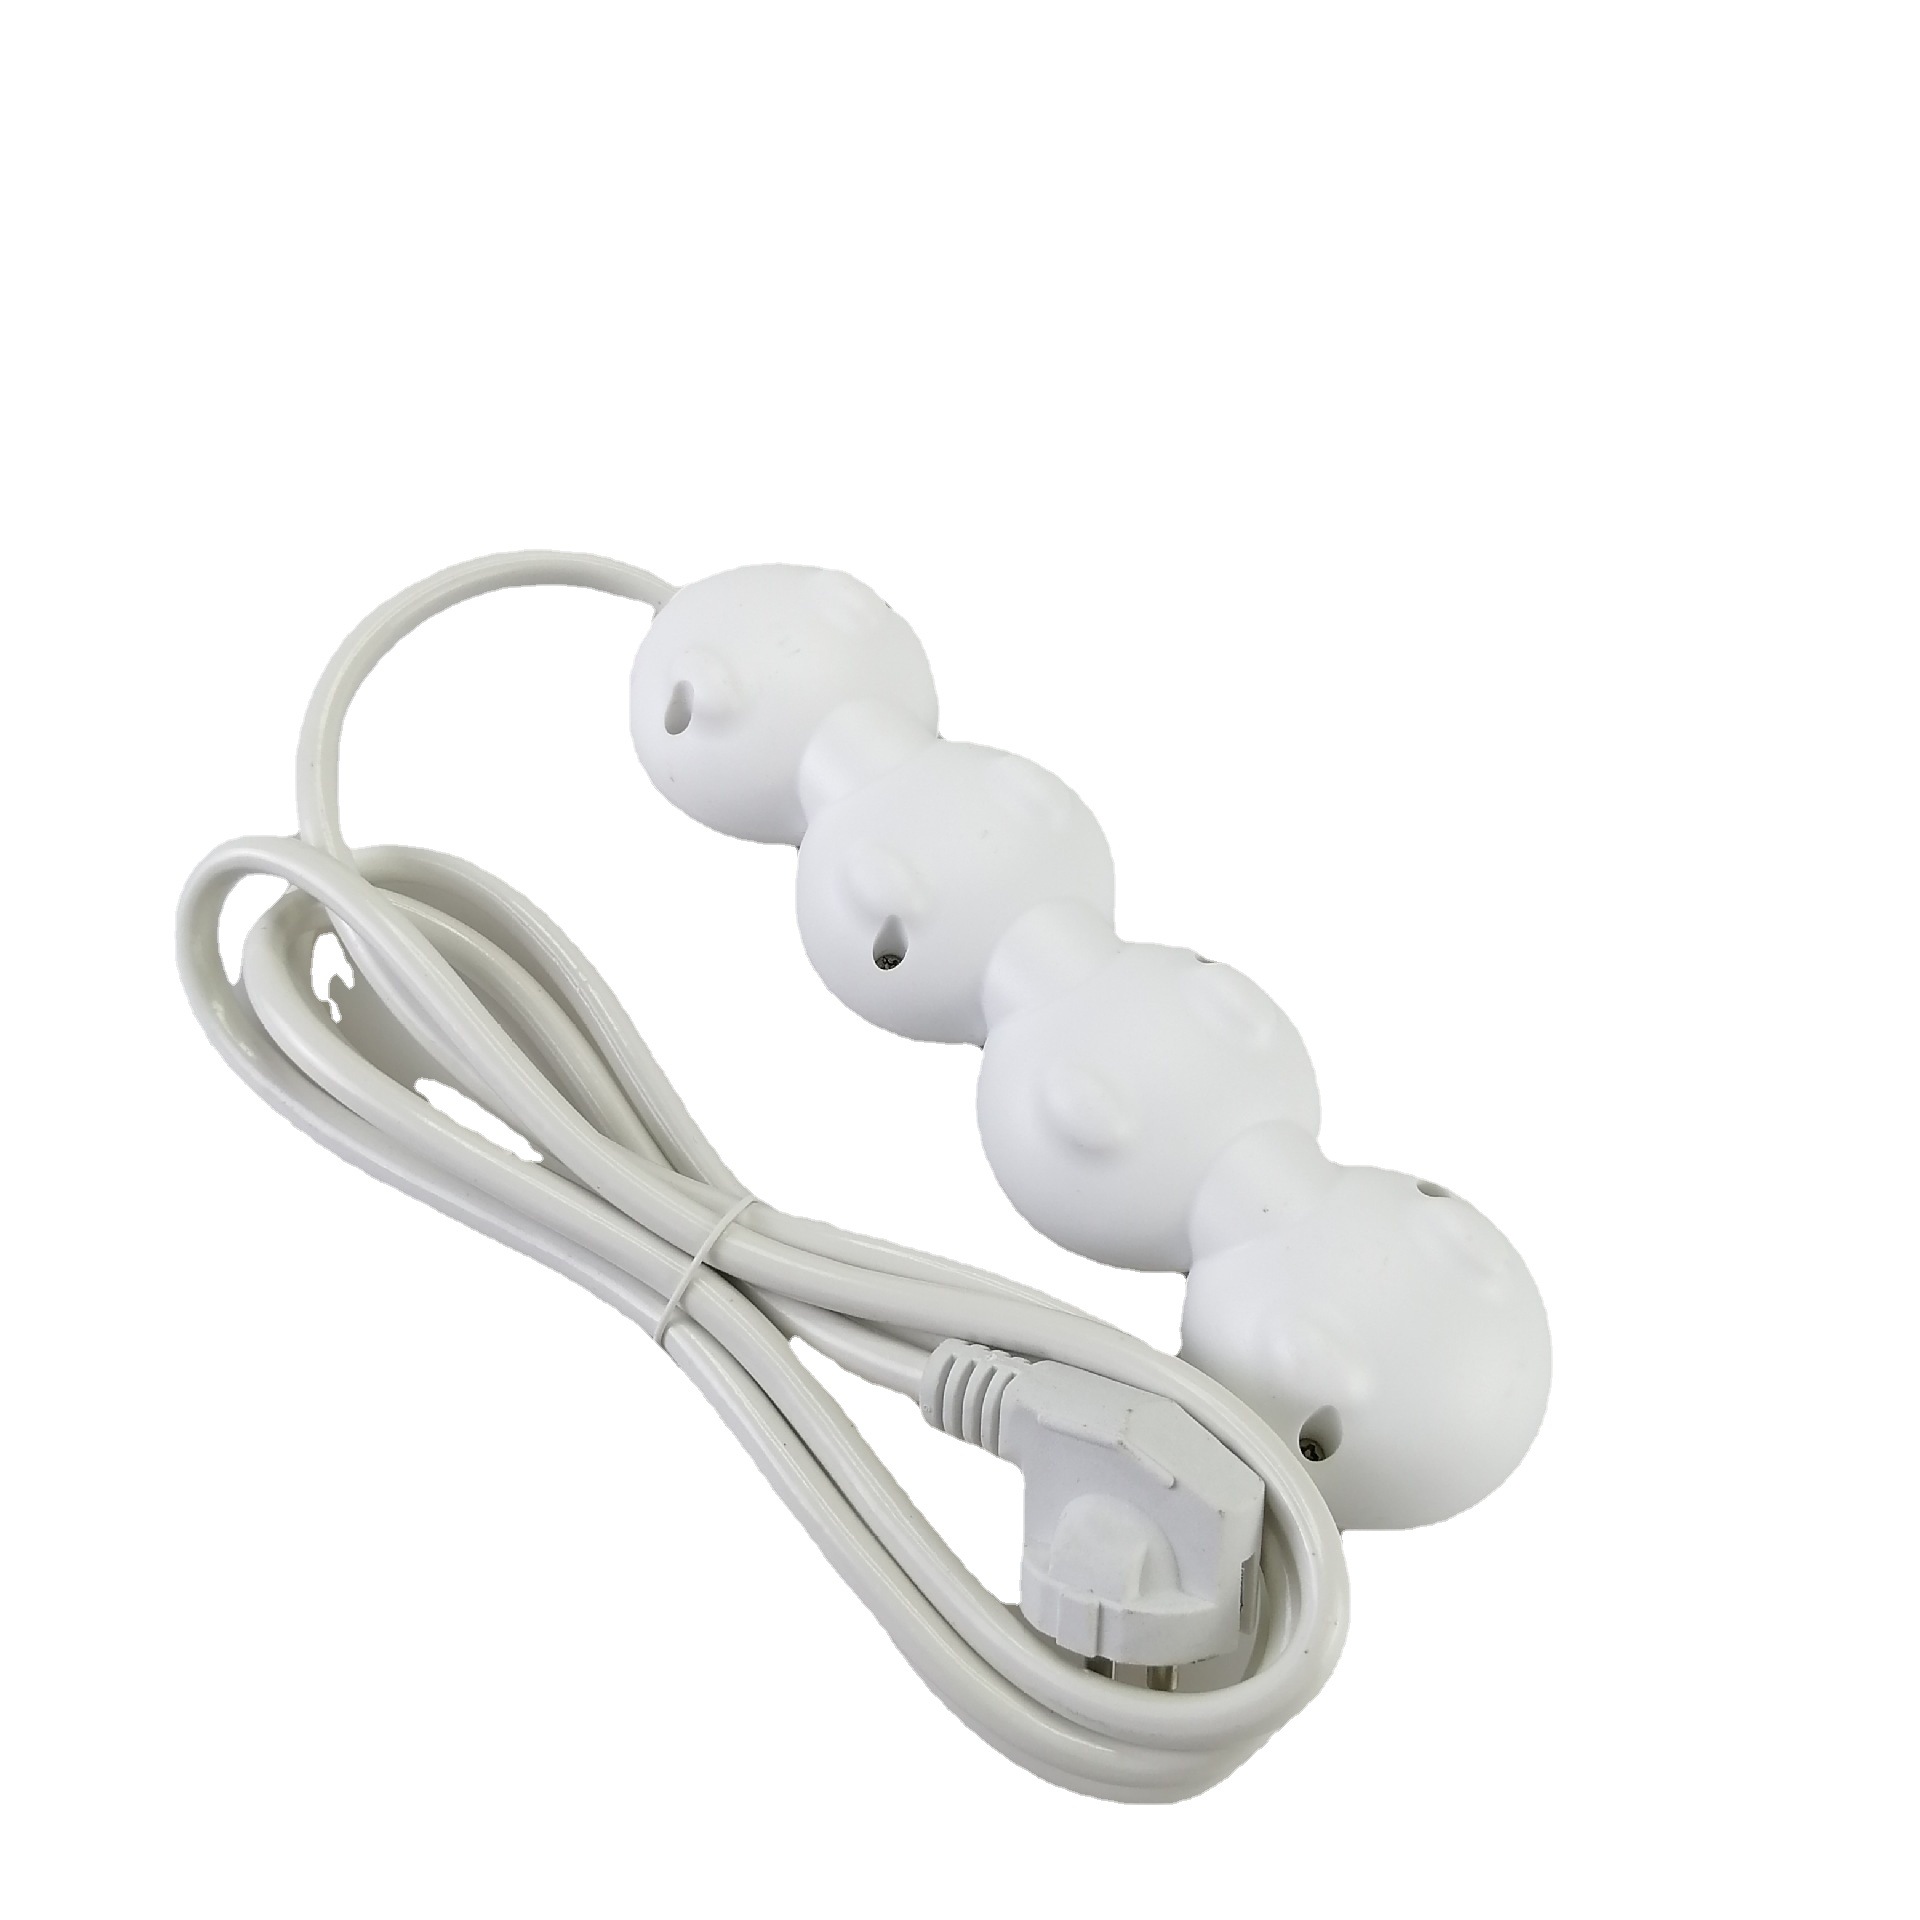 4 Way Extension Cord Socket with Switch EU Standard